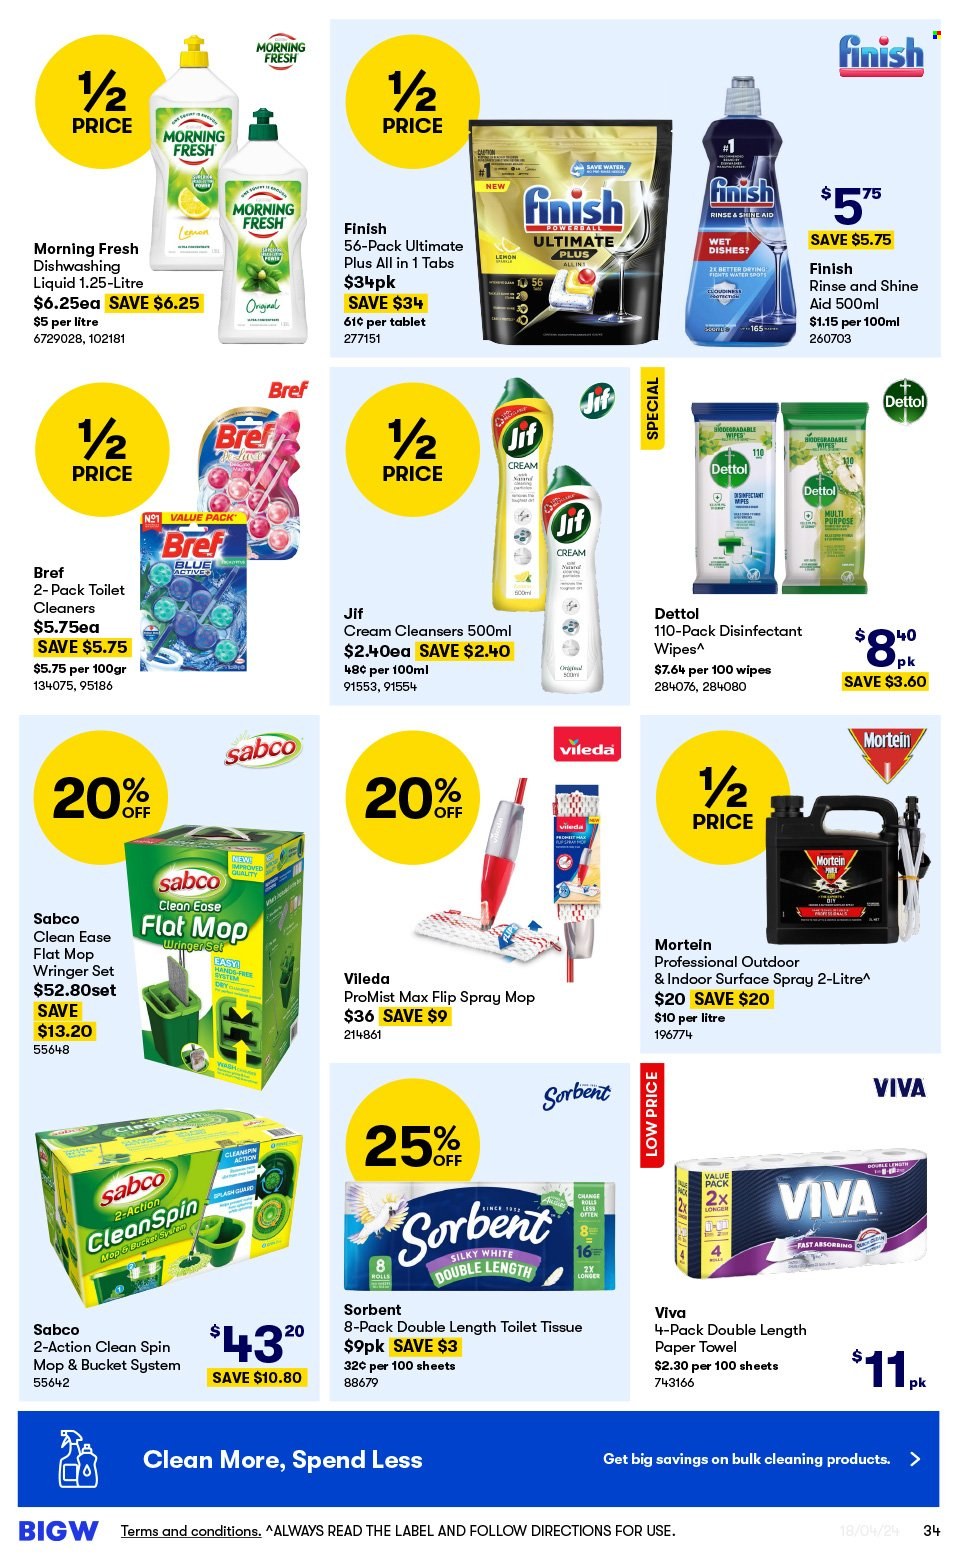 thumbnail - BIG W Catalogue - Sales products - Jif, wipes, Dettol, toilet paper, paper towels, cleaner, Mortein, Sabco, dishwashing liquid, Finish Powerball, cleanser, insecticide, Vileda, bucket, label, spin mop, mop. Page 34.